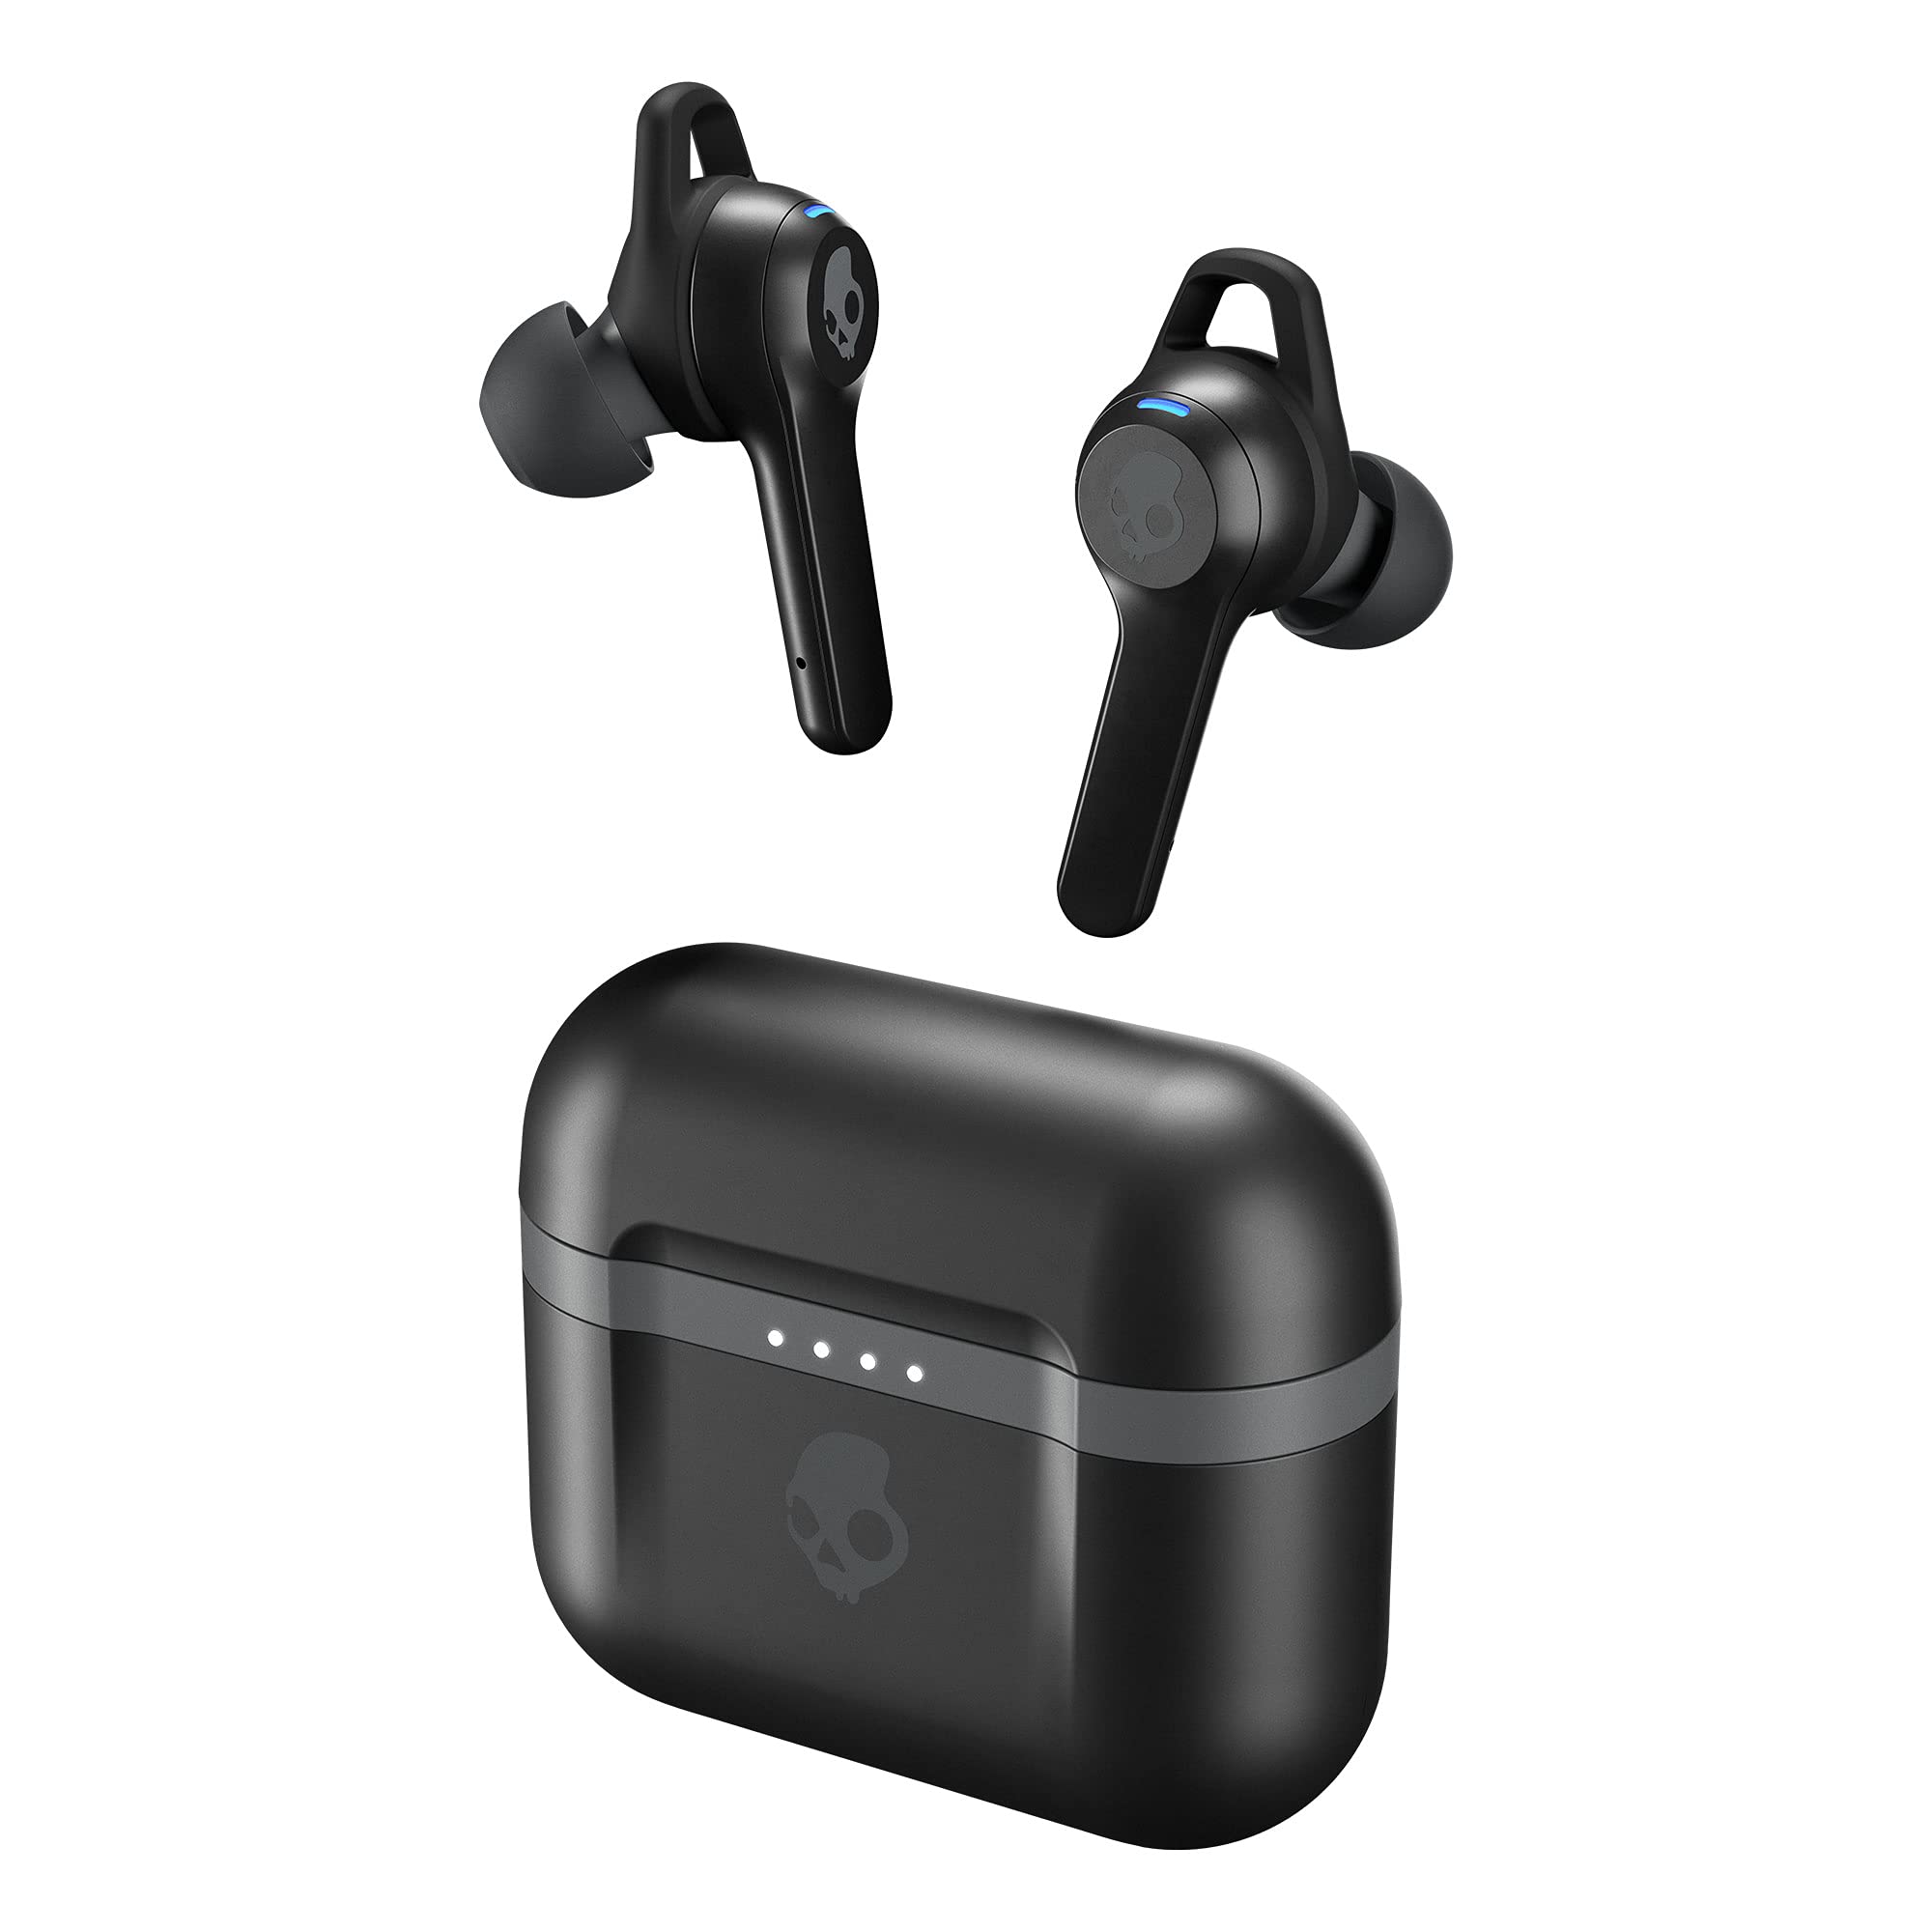 How To Turn Off Skullcandy Wireless Earbuds